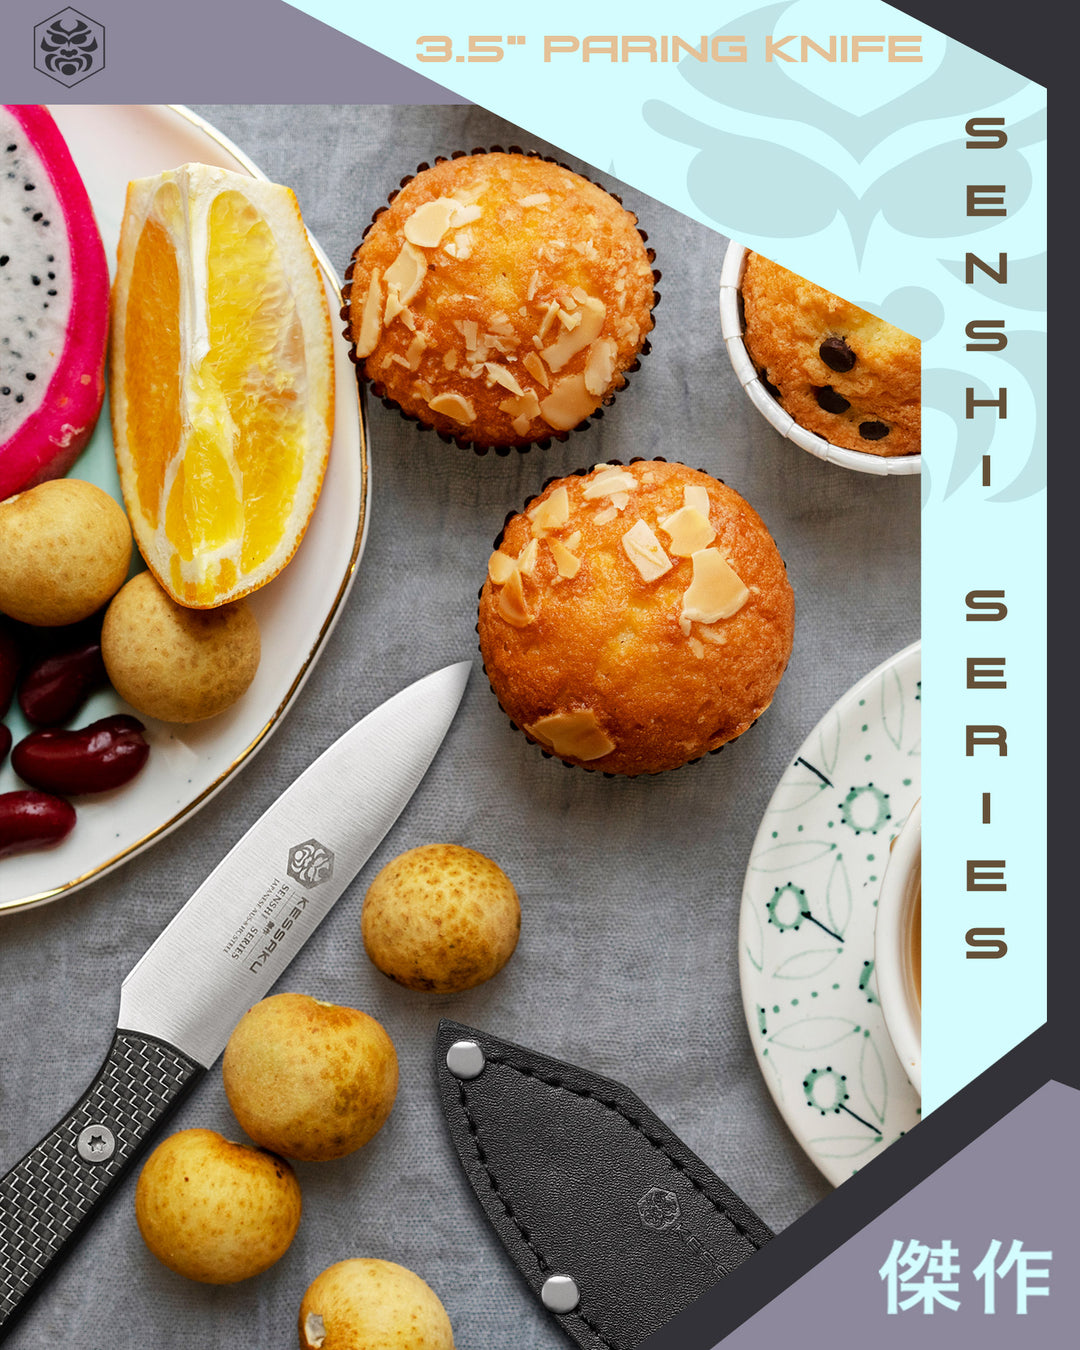 The Senshi Paring Knife and its leather sheath among passionfruit, an orange wedge, muffins, and coffee.